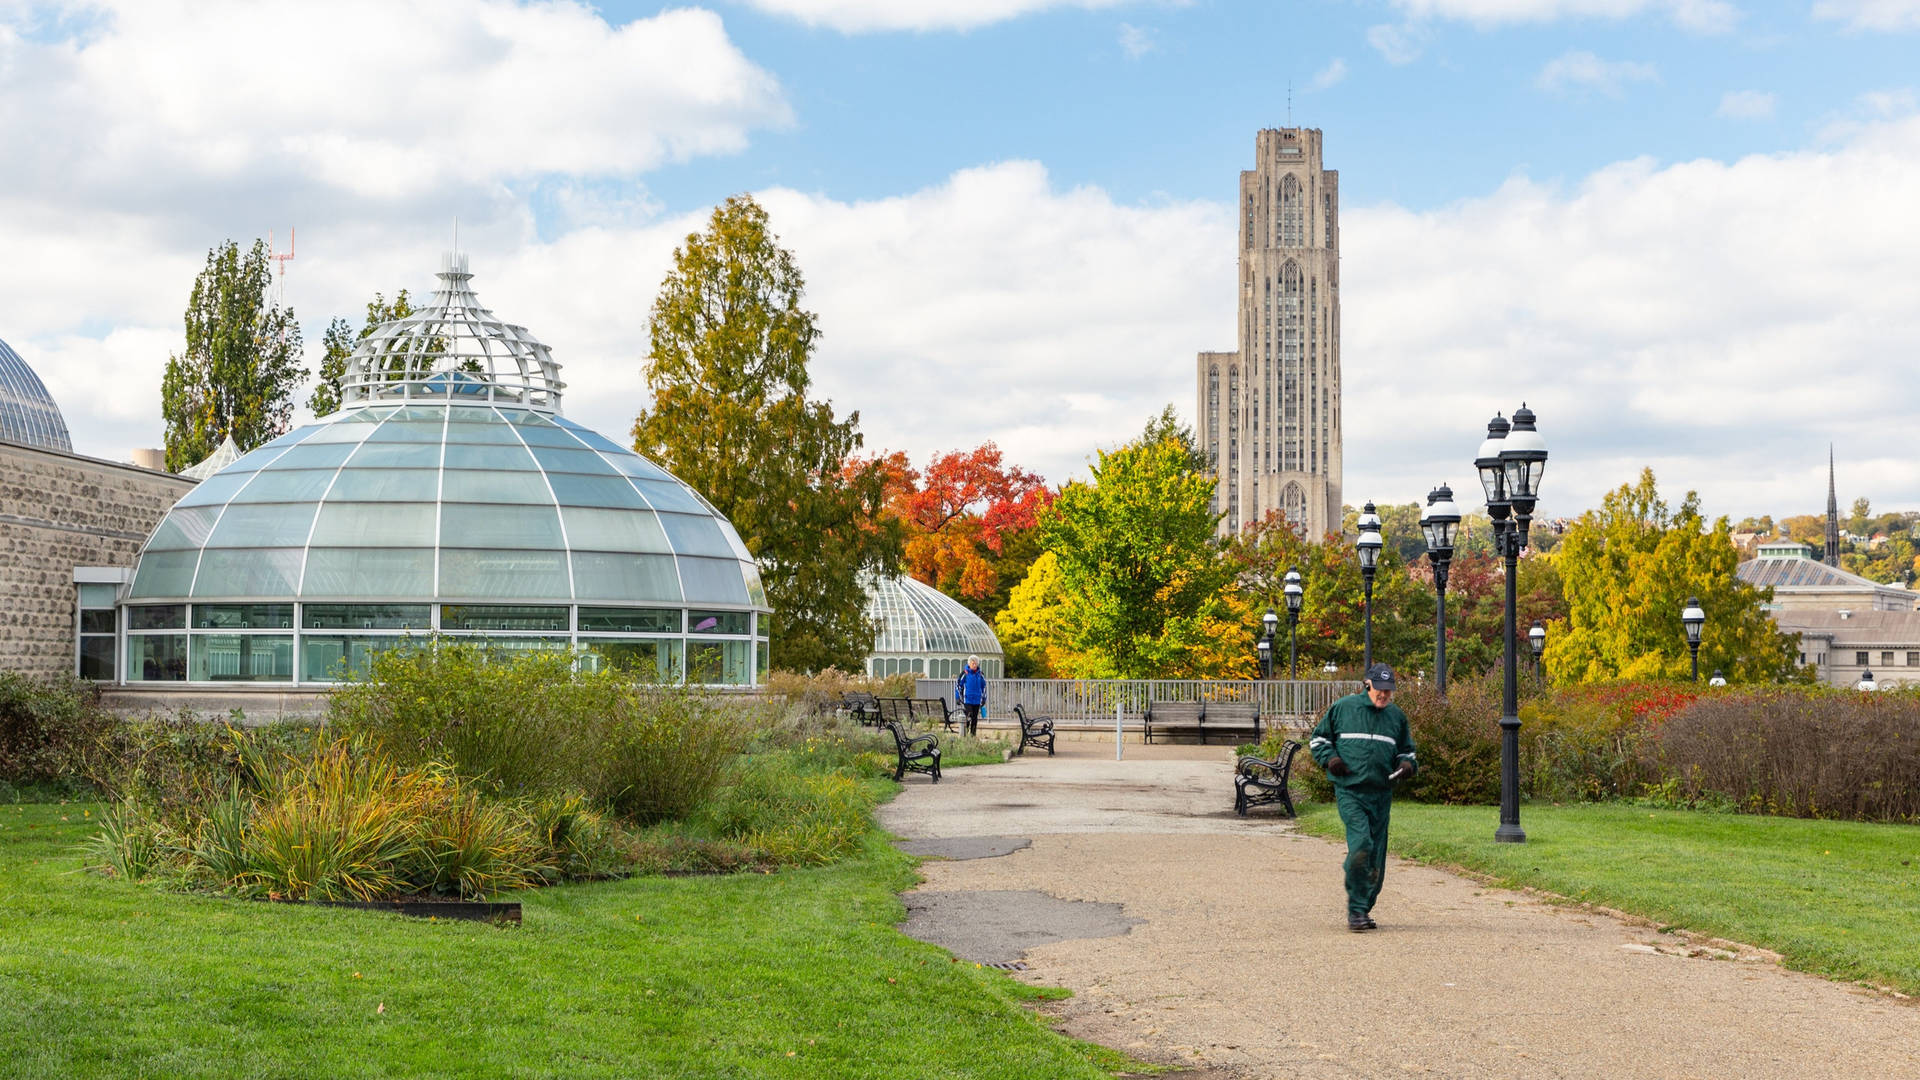 University Of Pittsburgh And Phipps Conservatory Picture